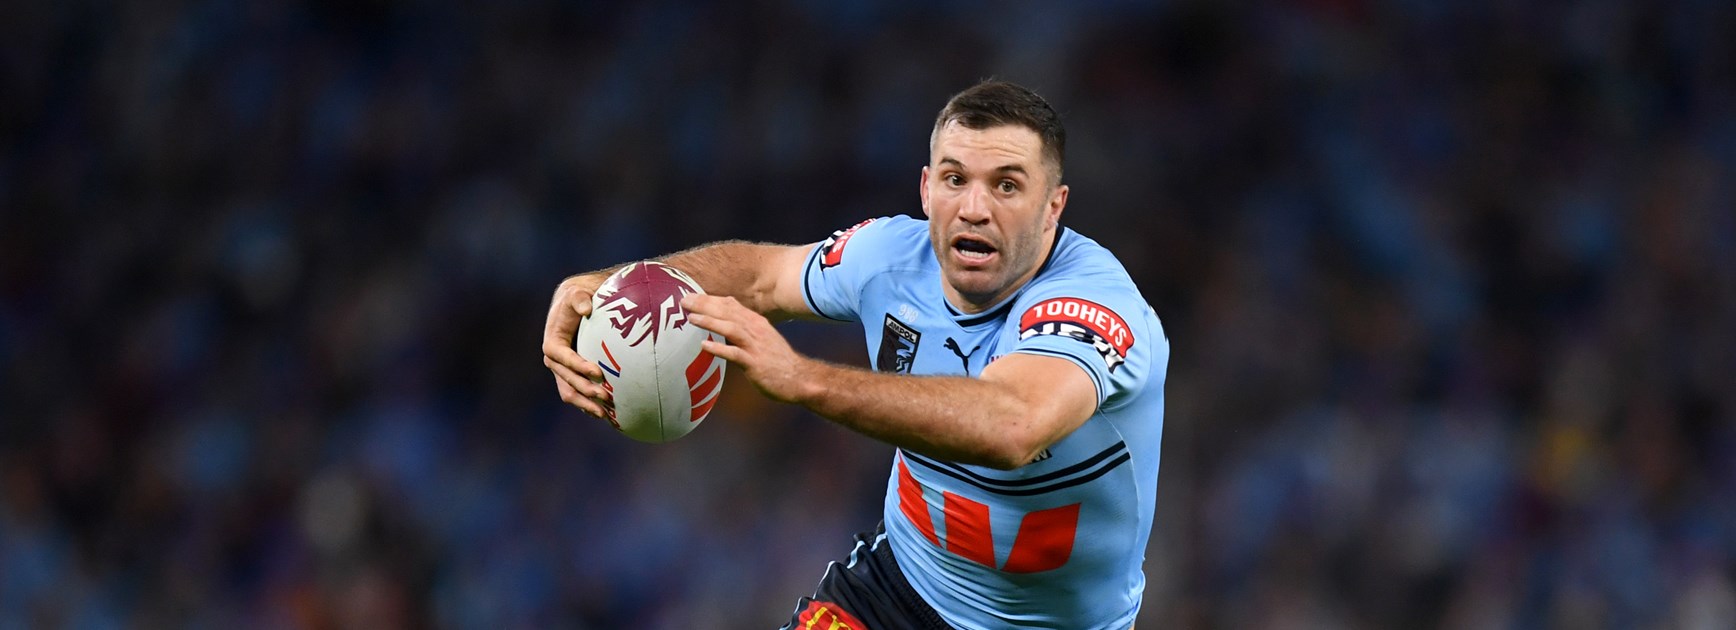 Tedesco set to join NSW Blues after Edwards ruled out of Origin I